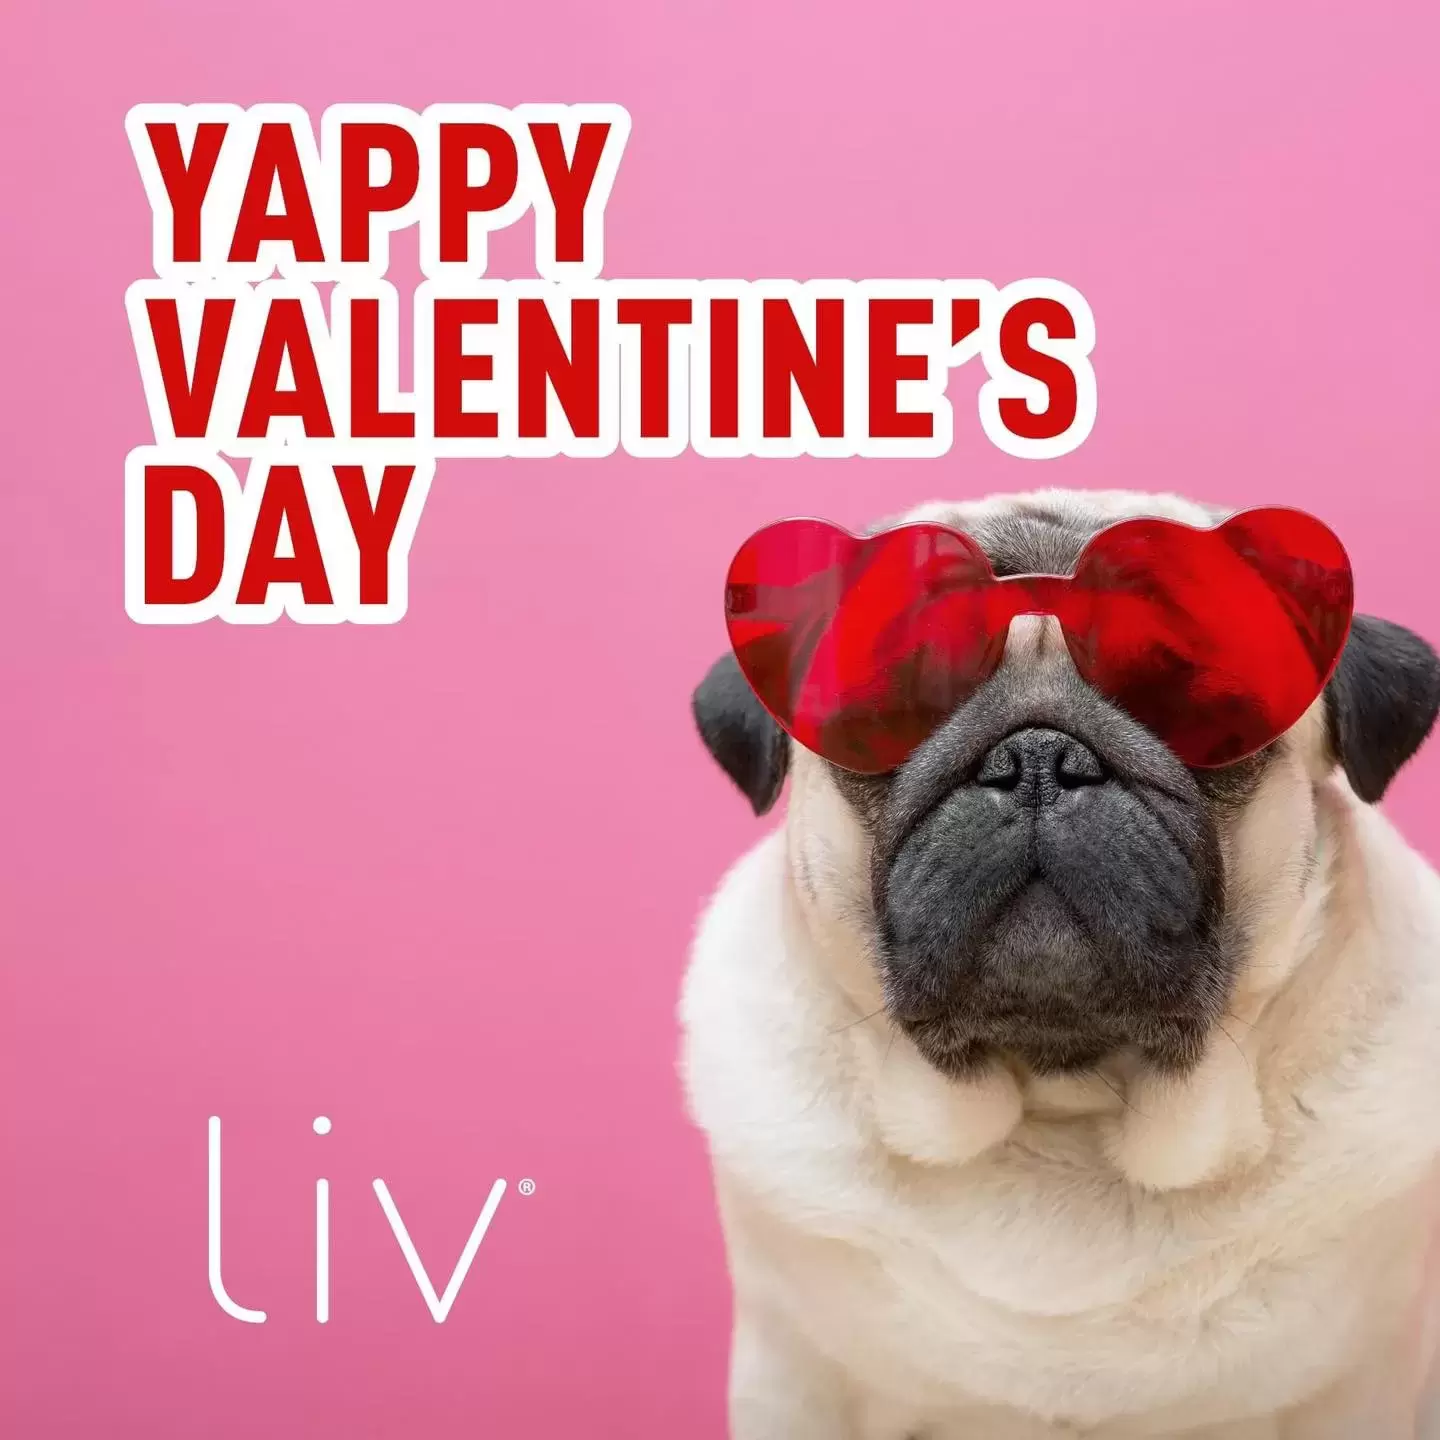 Happy Valentines Day! It's that time of year when we express our luv, appreciation, and kindness to those around us. Whether it's your besties, family, or significant other - make sure to take time to let them know how much they mean to you. 💗

 #livforluv #LivArbors #livlikenoother #valentines2024